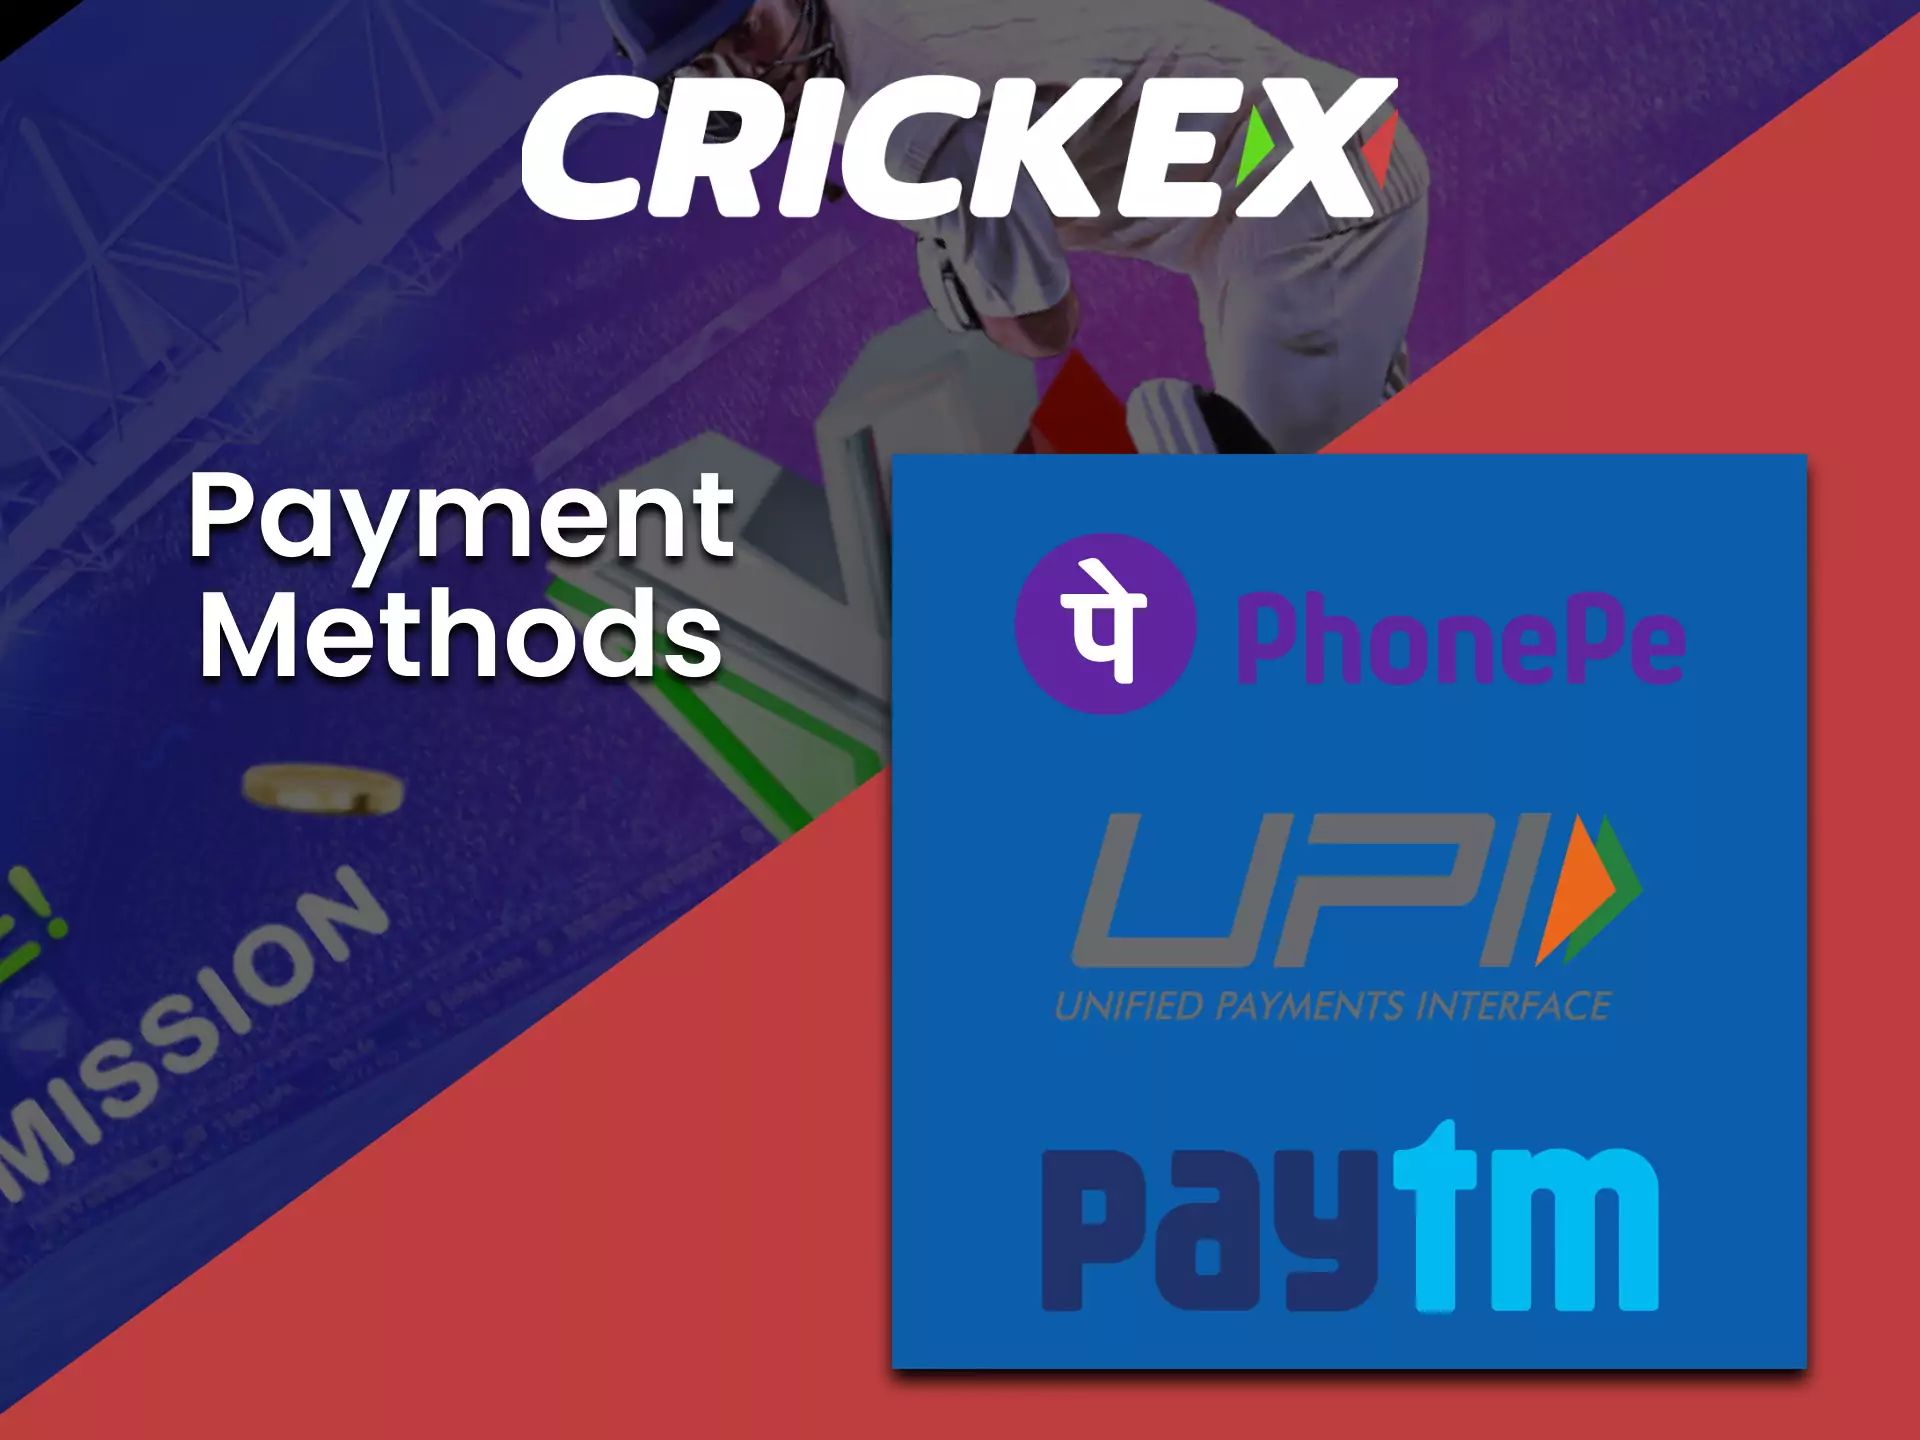 Use Indian payment methods for withdrawing money from your Crickex account.